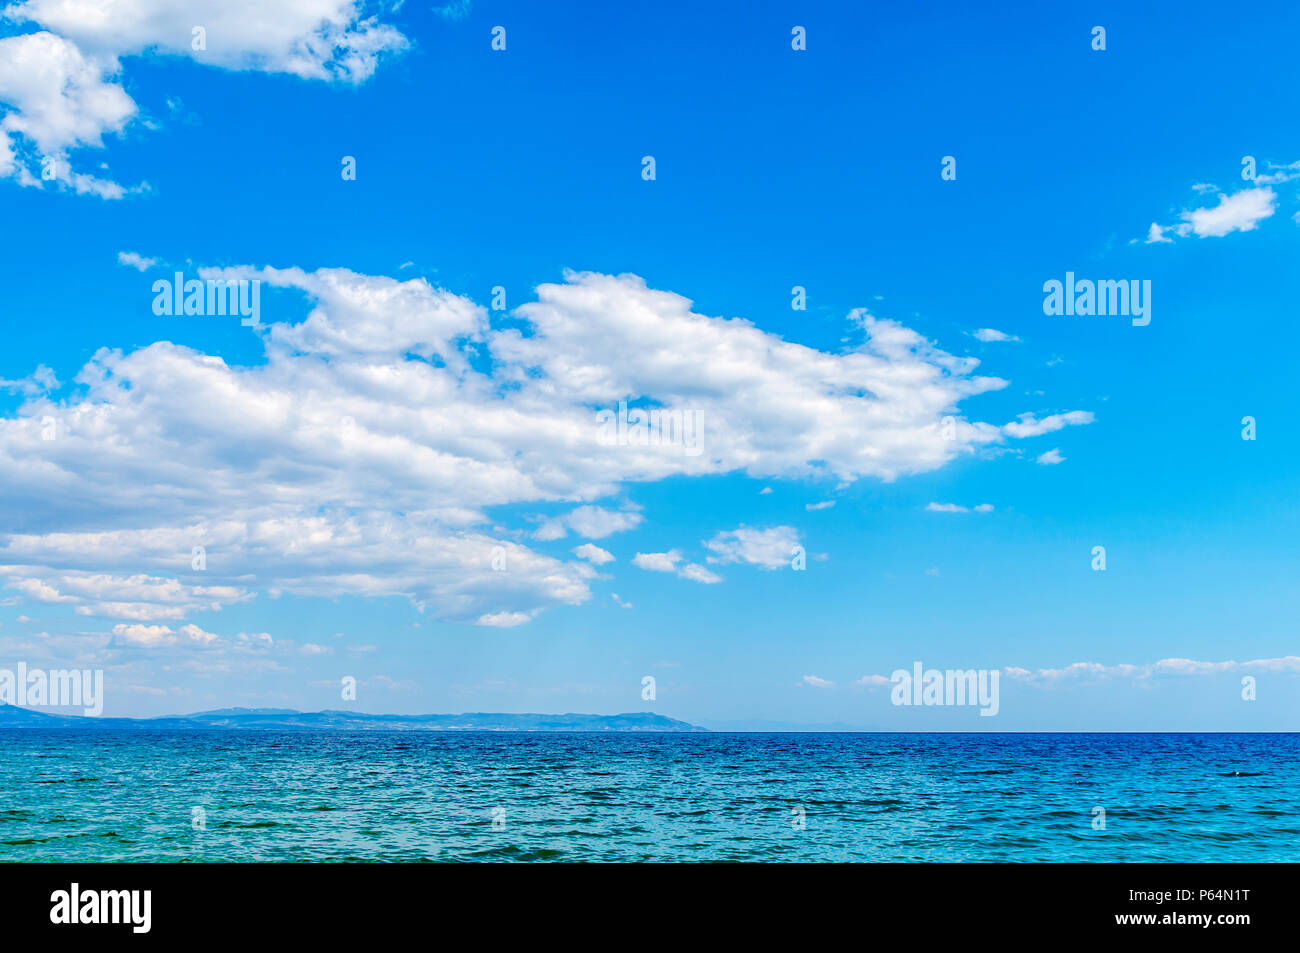 Perfect sky and water of ocean background Stock Photo